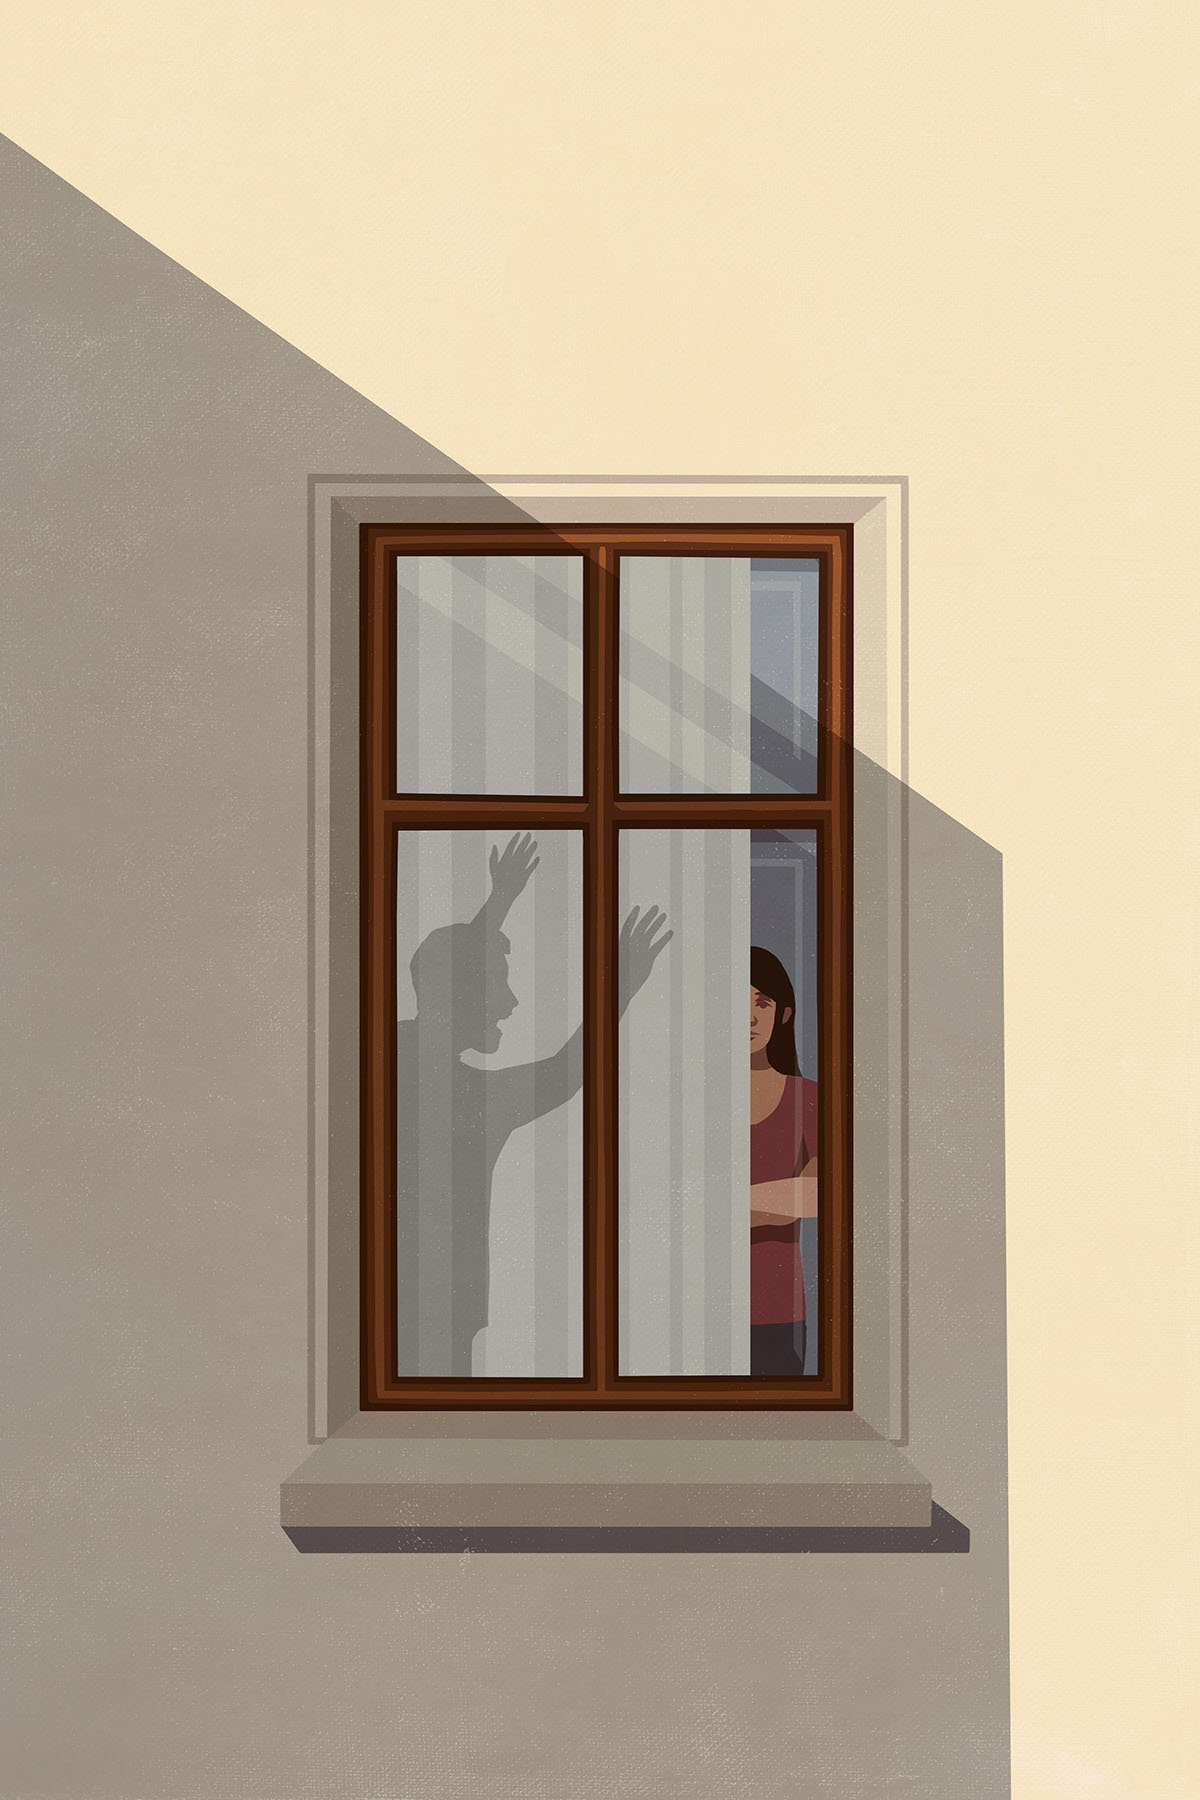 Illustration of the shadow of an angry man gesticulating at woman in apartment window